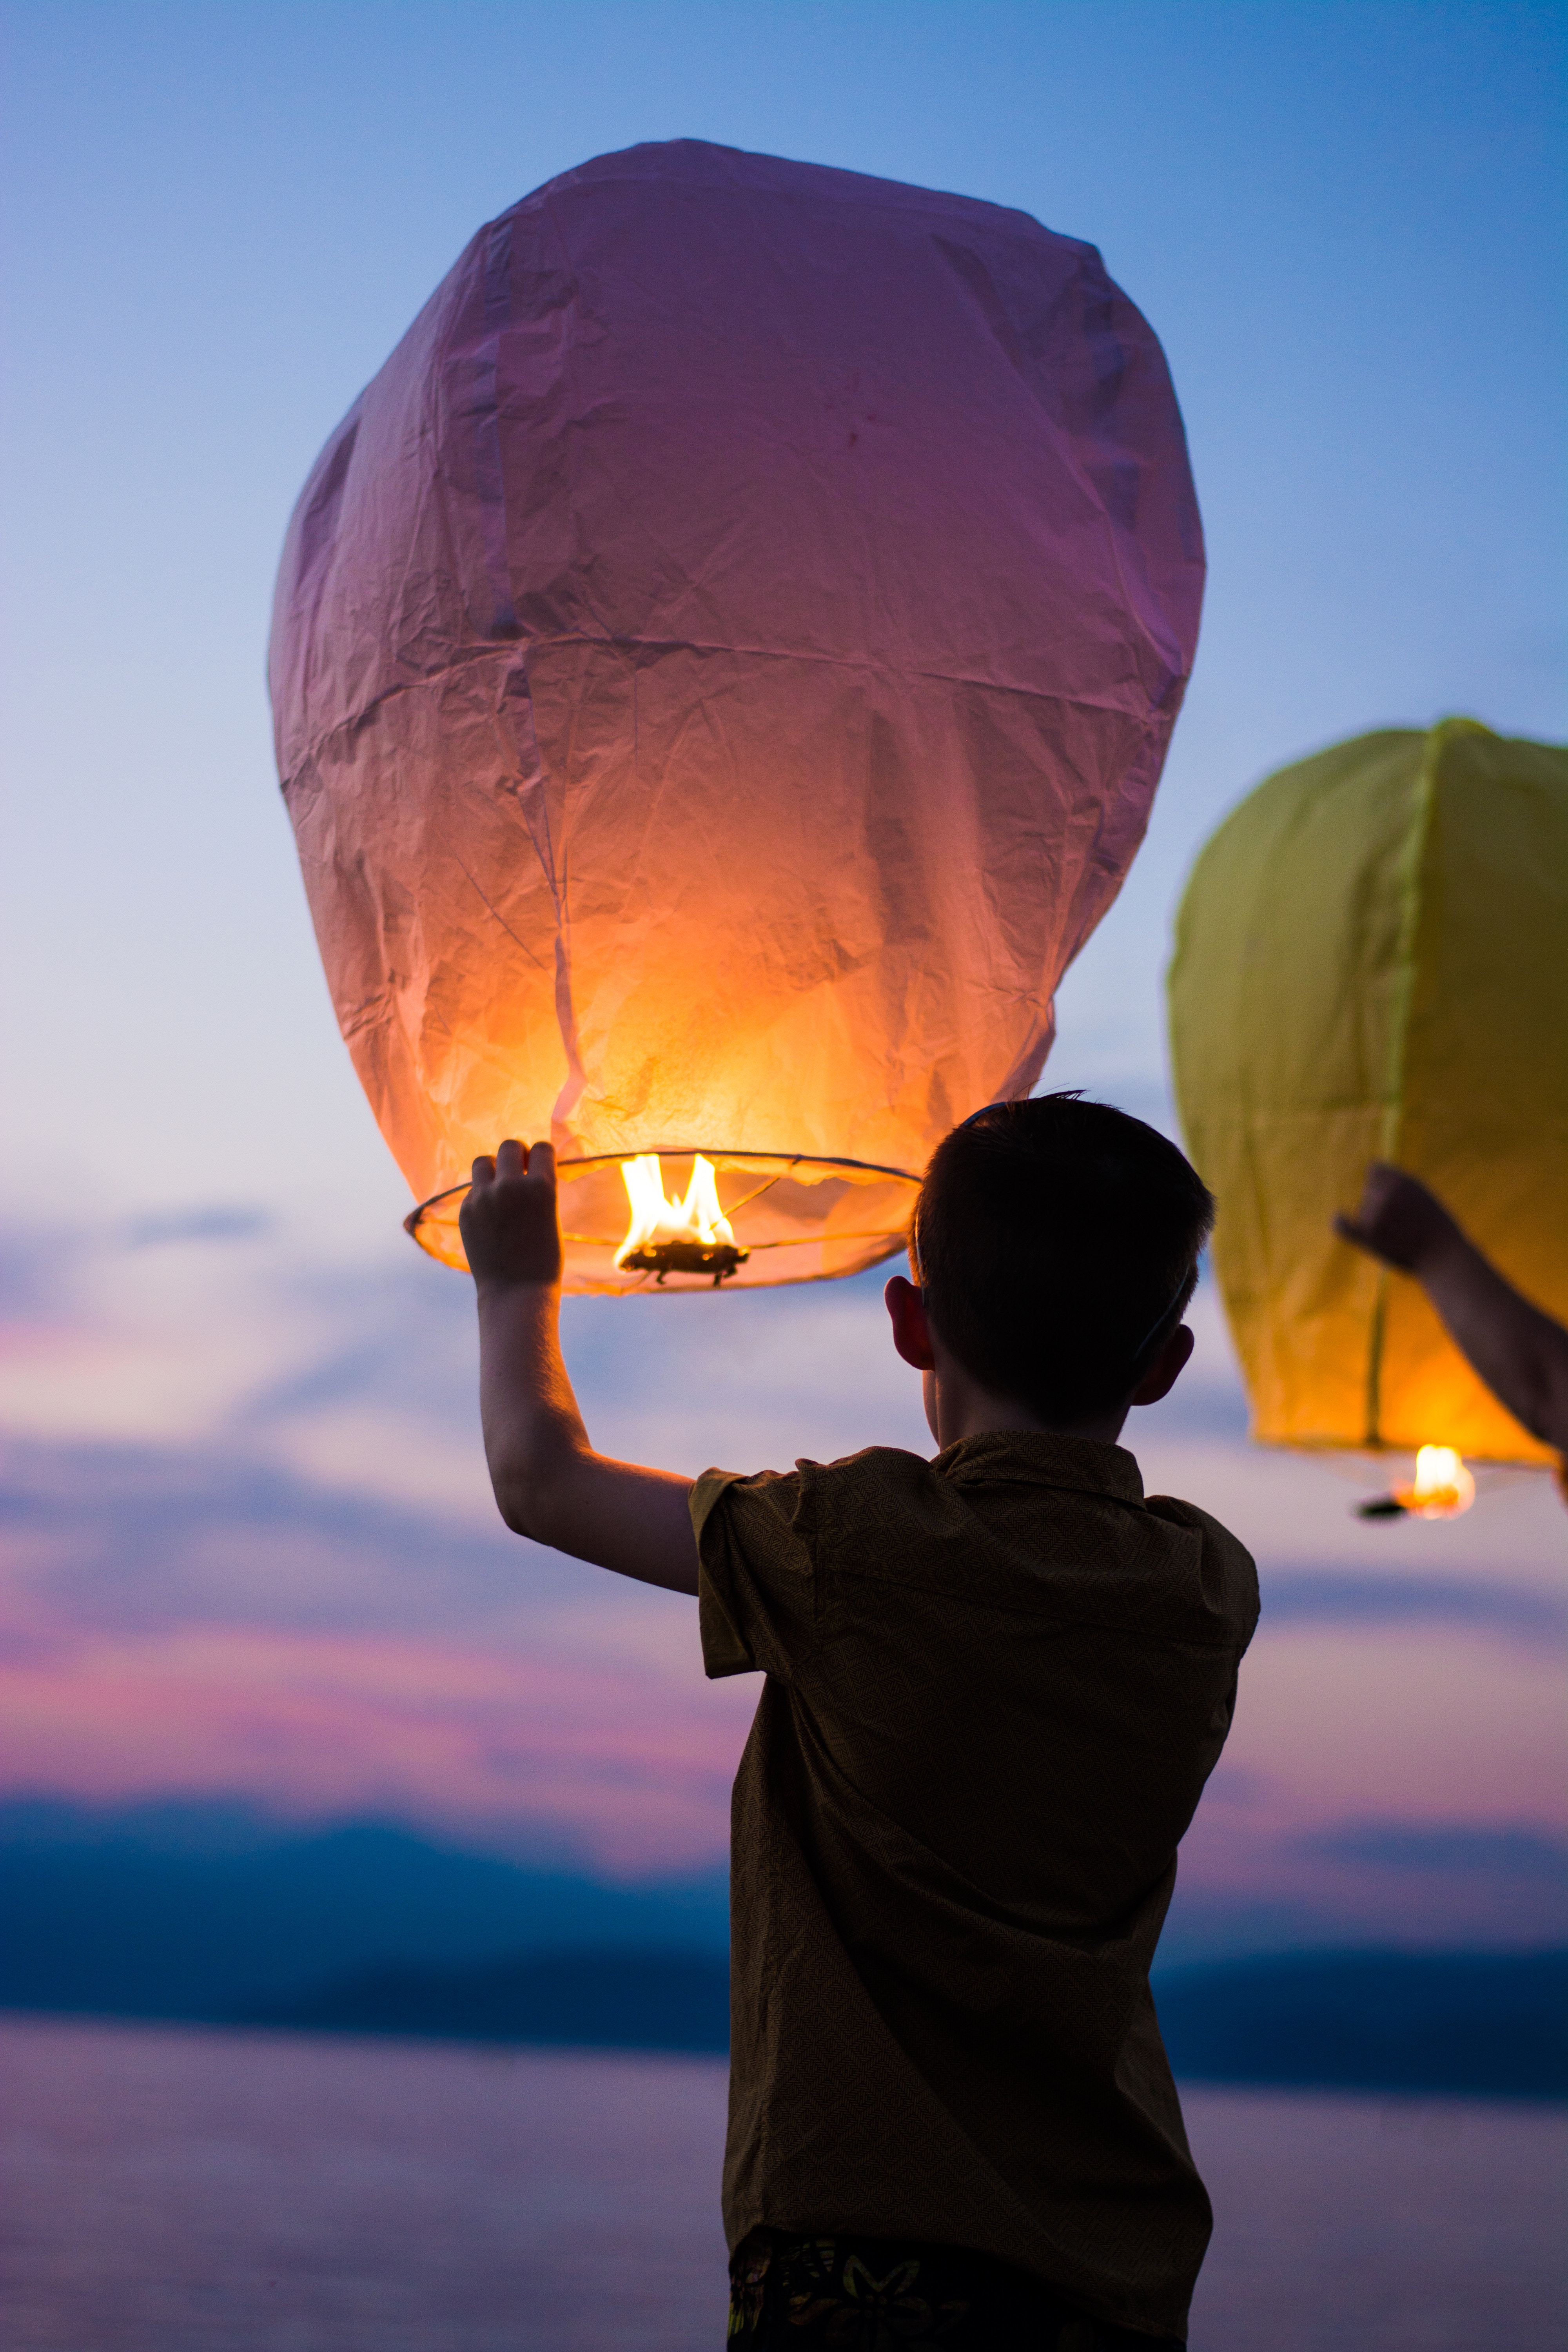 Releasing the free magical inner child Photo by Gianandrea Villa on Unsplash